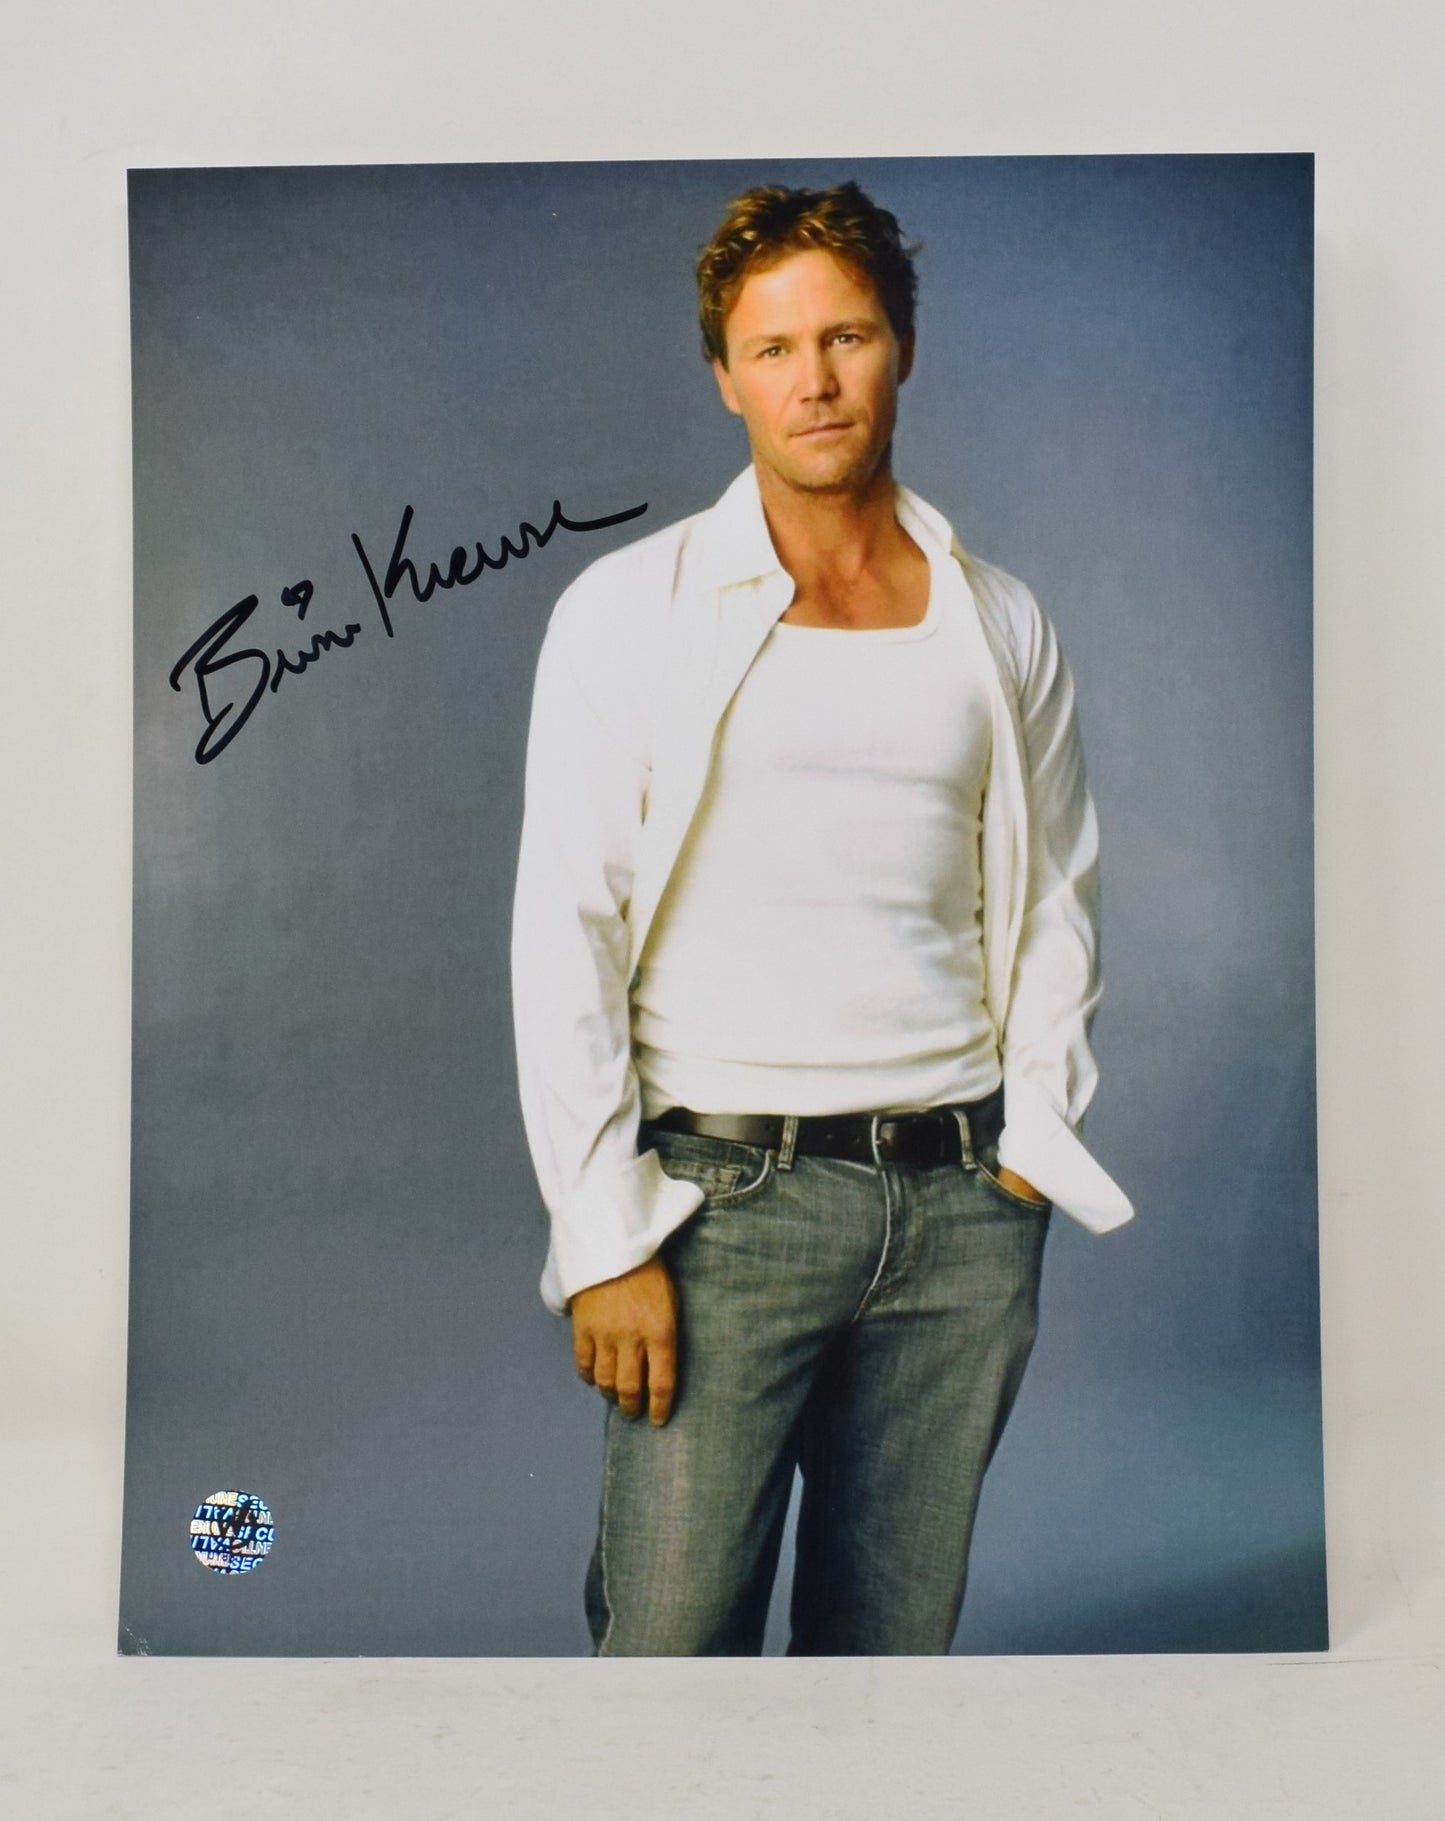 Brian Krause Charmed Signed Autograph 8 x 10 Photo COA